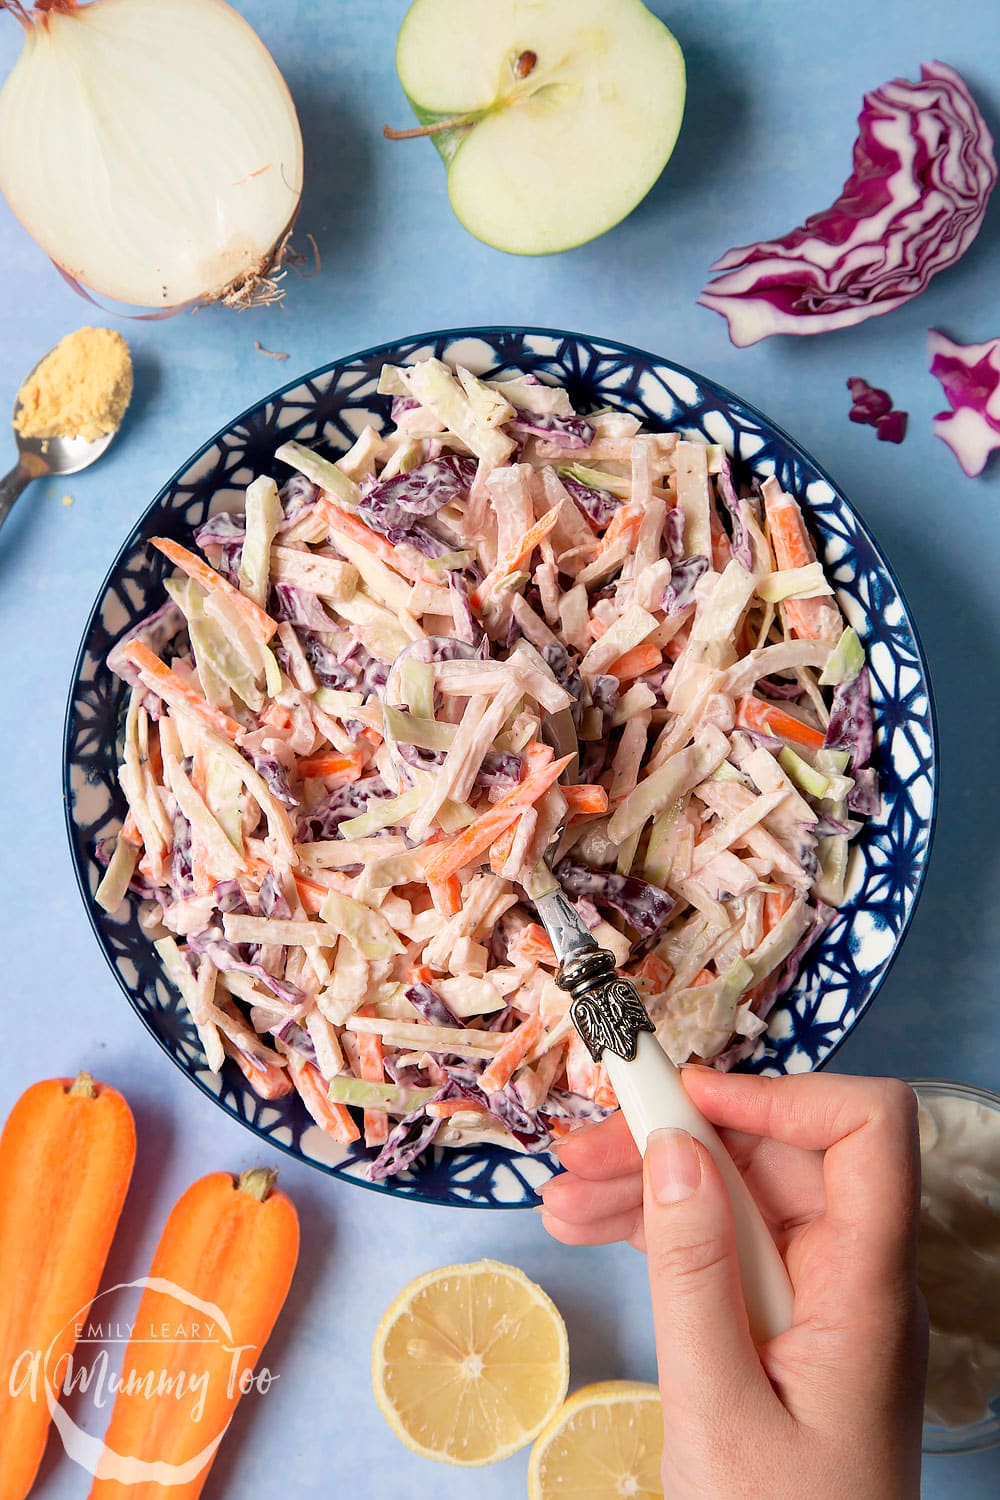 Creamy coleslaw without mayo served in a bowl. A hand is holding a spoon, which is dipped into the coleslaw.